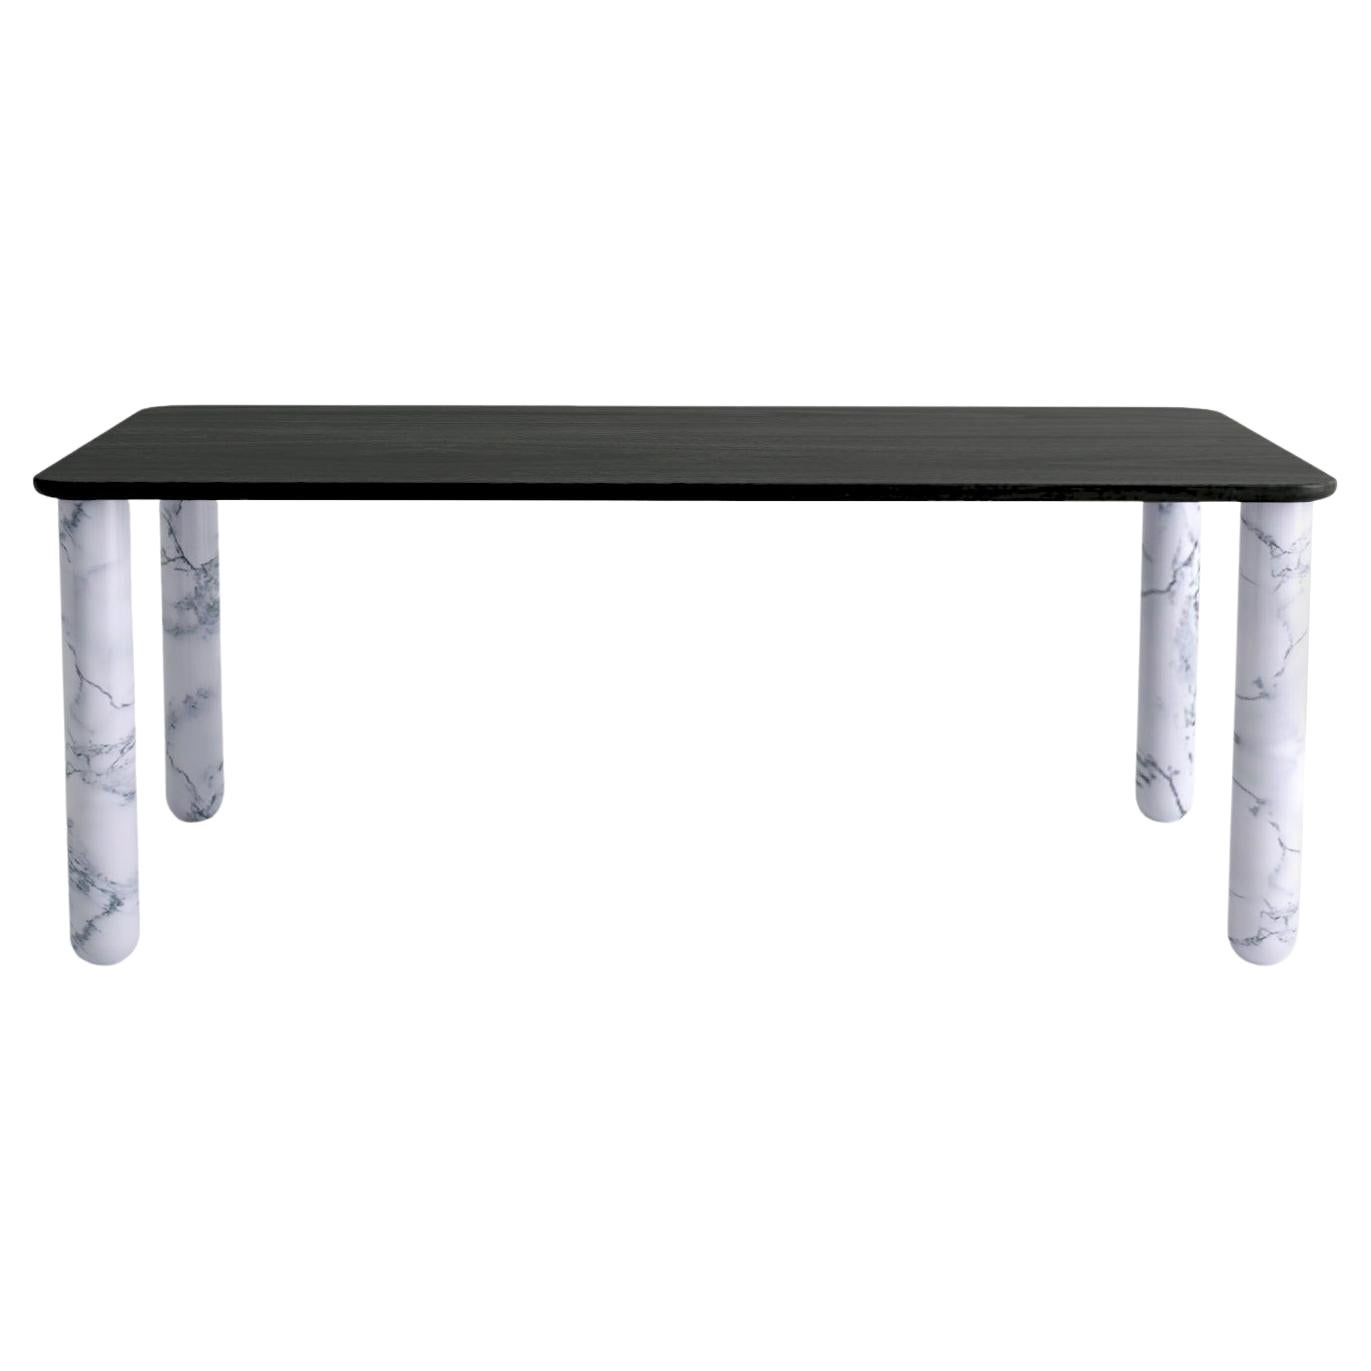 Xlarge Black Wood and White Marble "Sunday" Dining Table, Jean-Baptiste Souletie